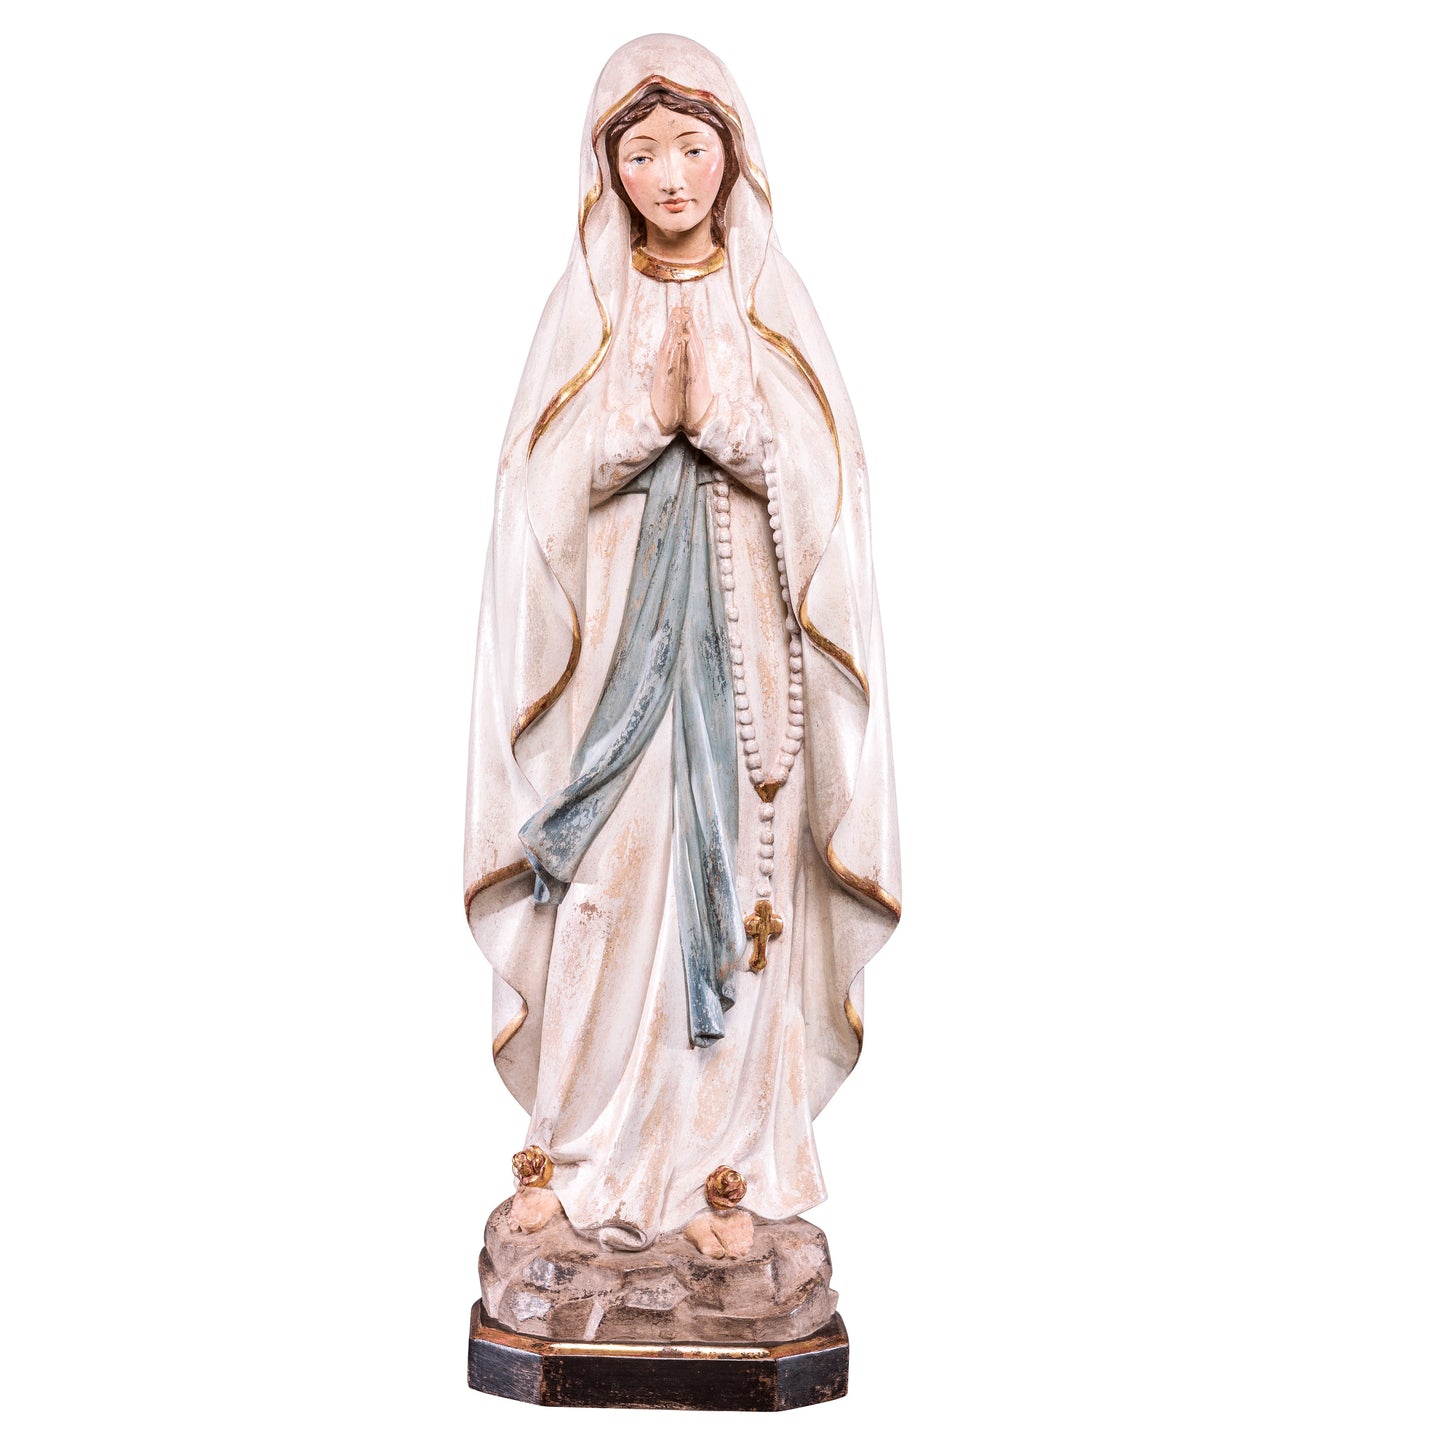 MONDO CATTOLICO Golden / 40 cm (15.7 in) Wooden statue of Our Lady of Lourdes